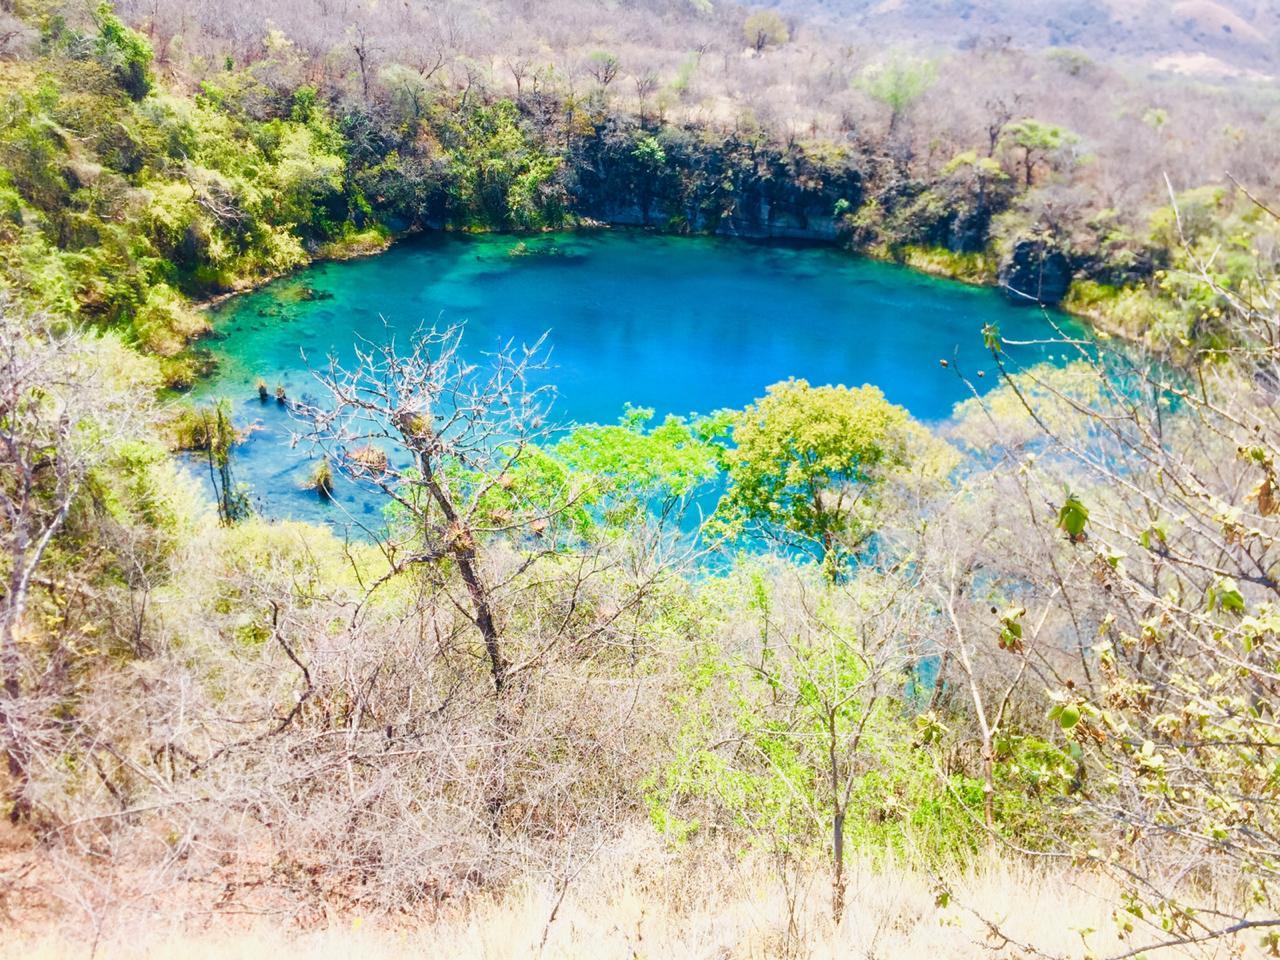 cool things to do in Guatemala: visit a Cenote